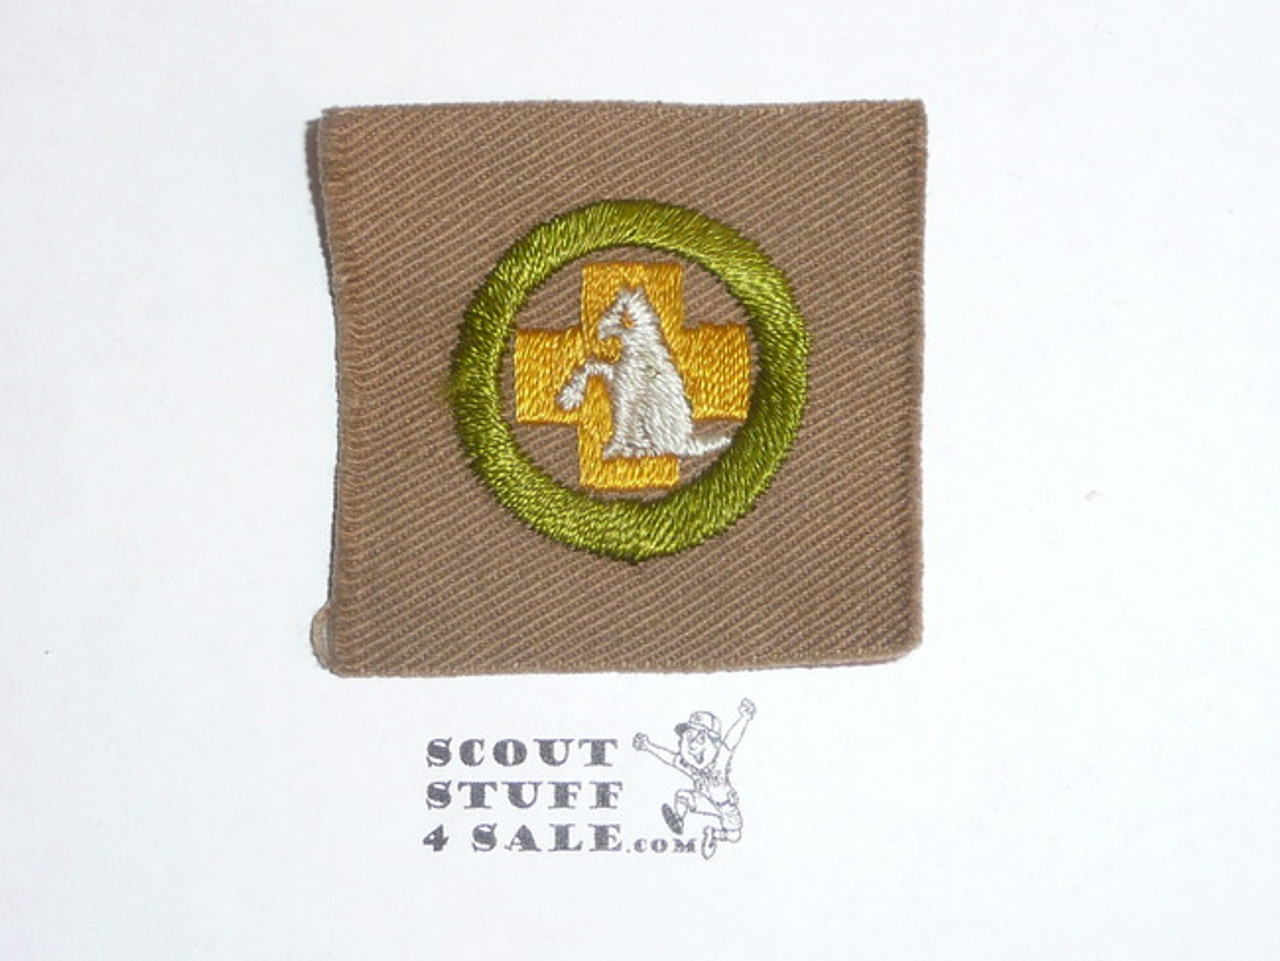 First Aid to Animals - Type A - Square Tan Merit Badge (1911-1933)